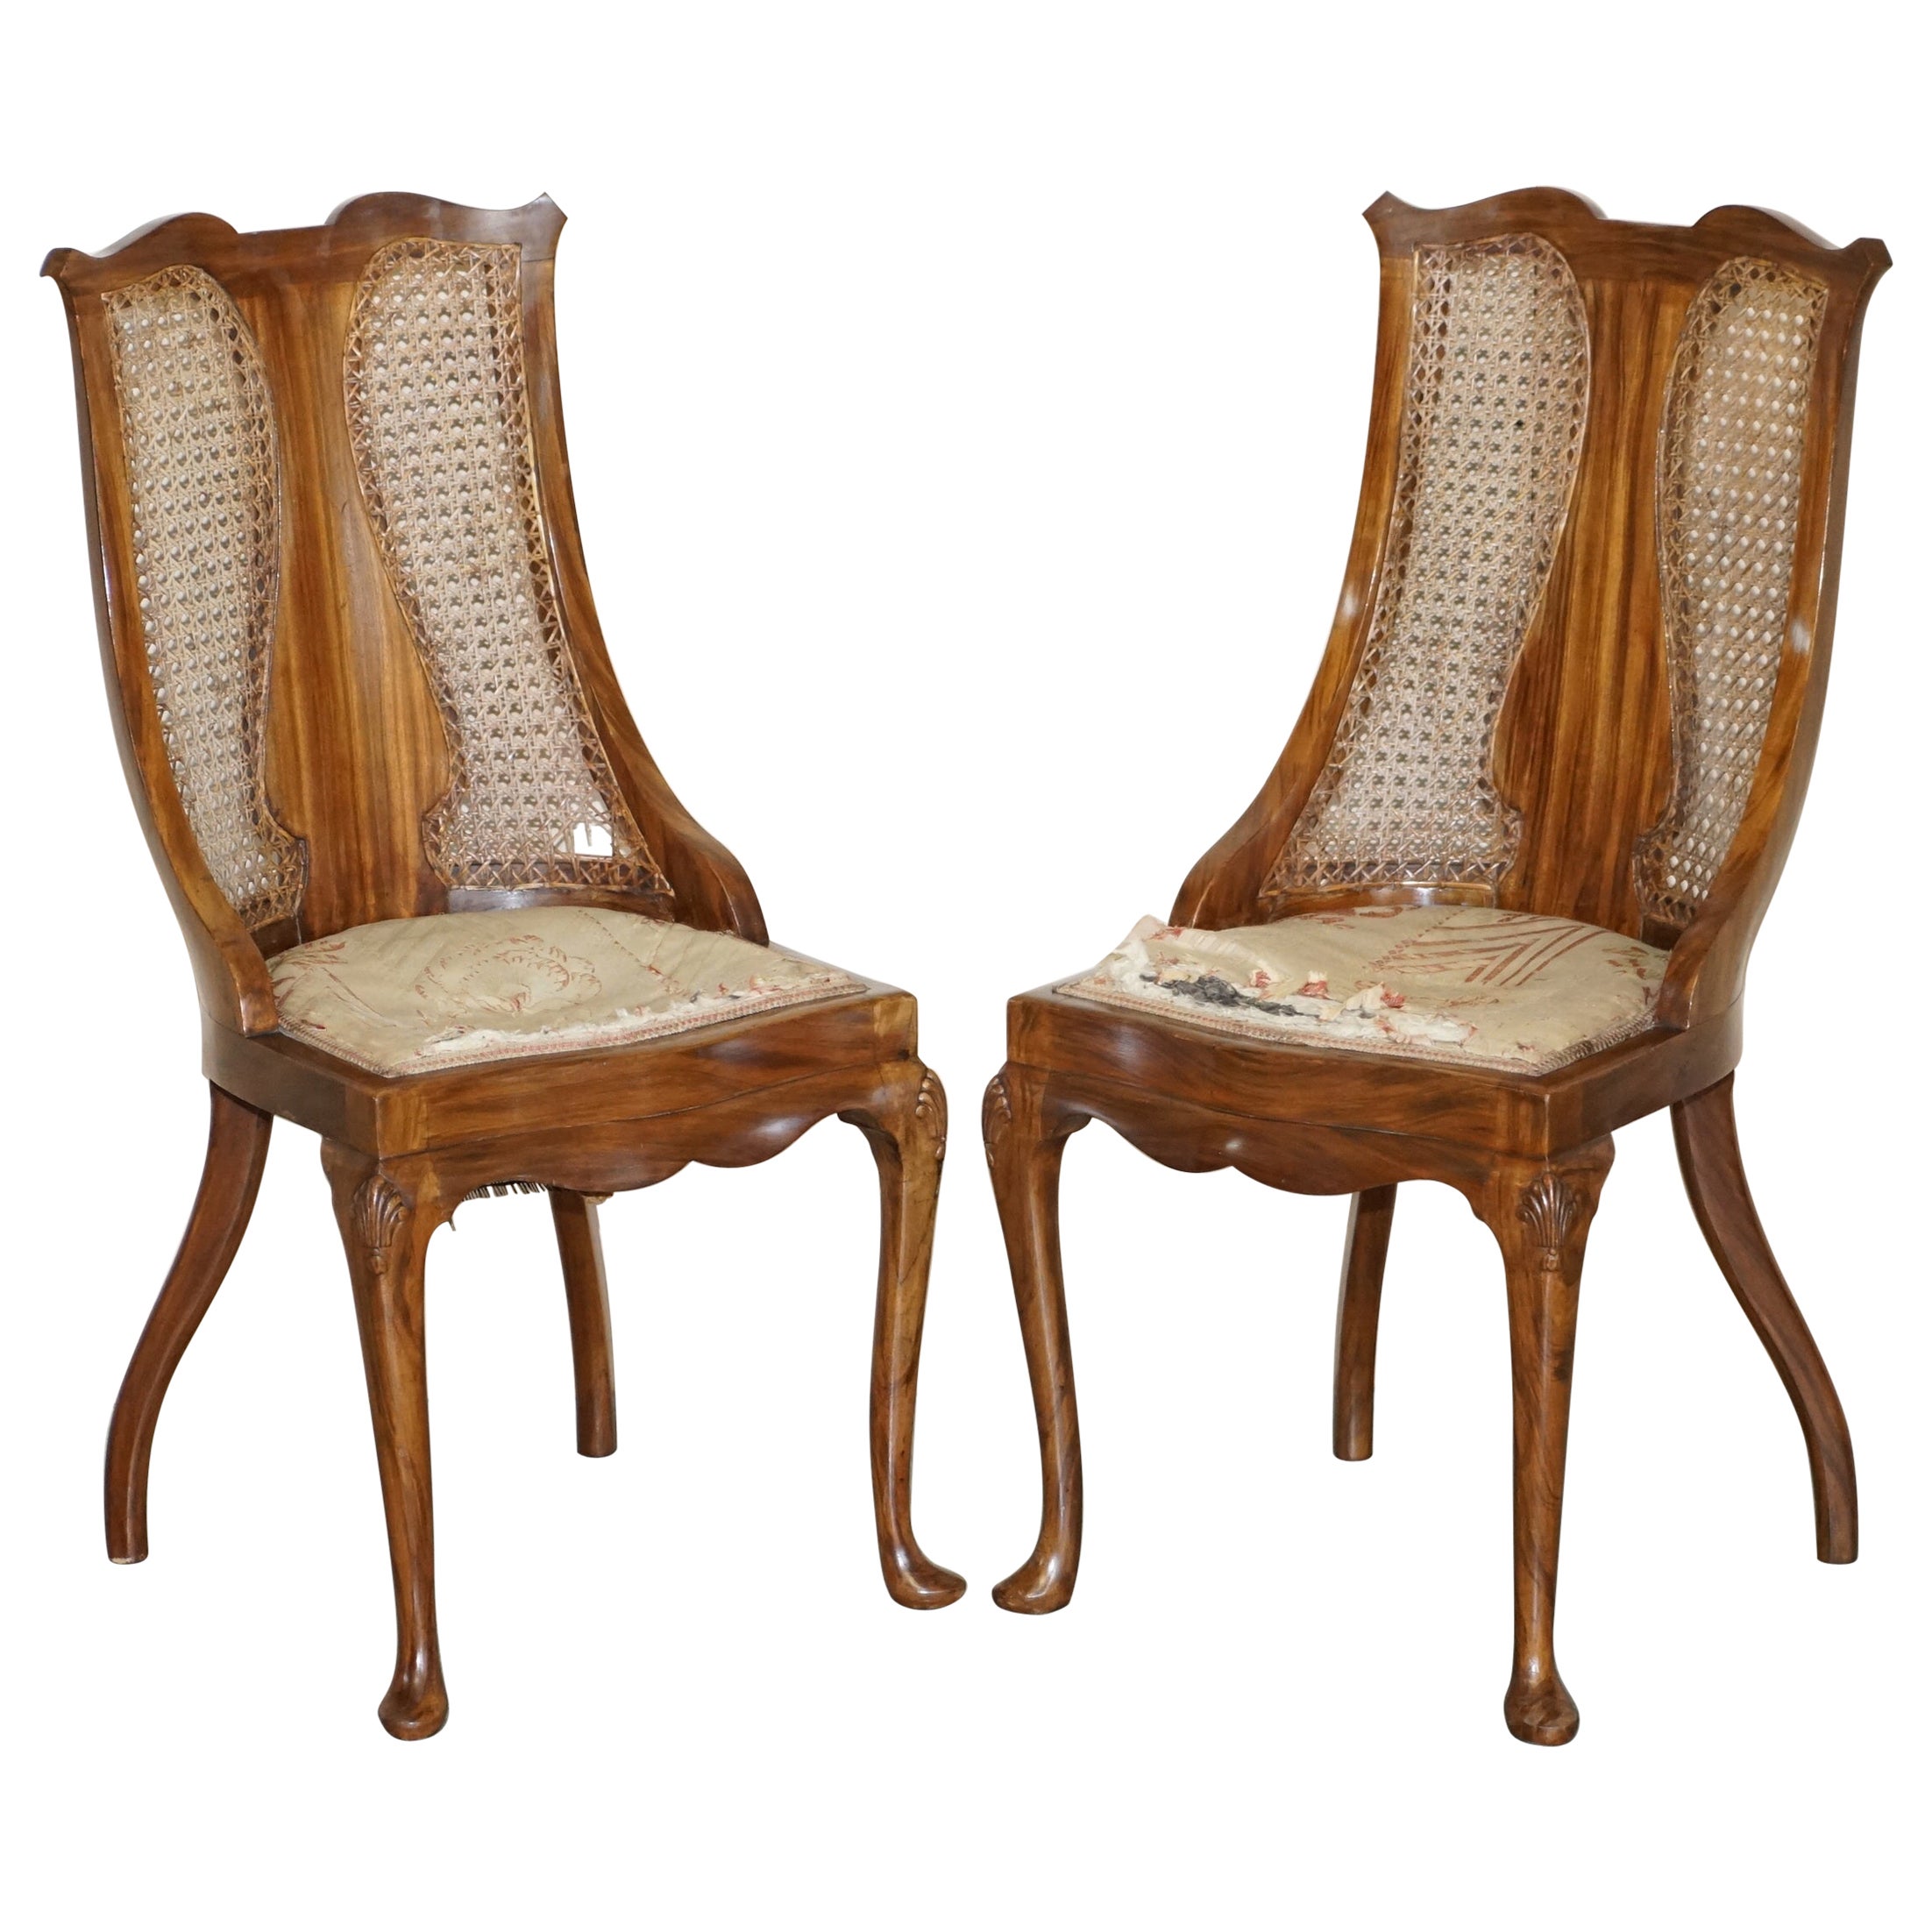 Lovely Pair of Art Deco Walnut & Hardwood Bergere Side Chairs Part of Suite